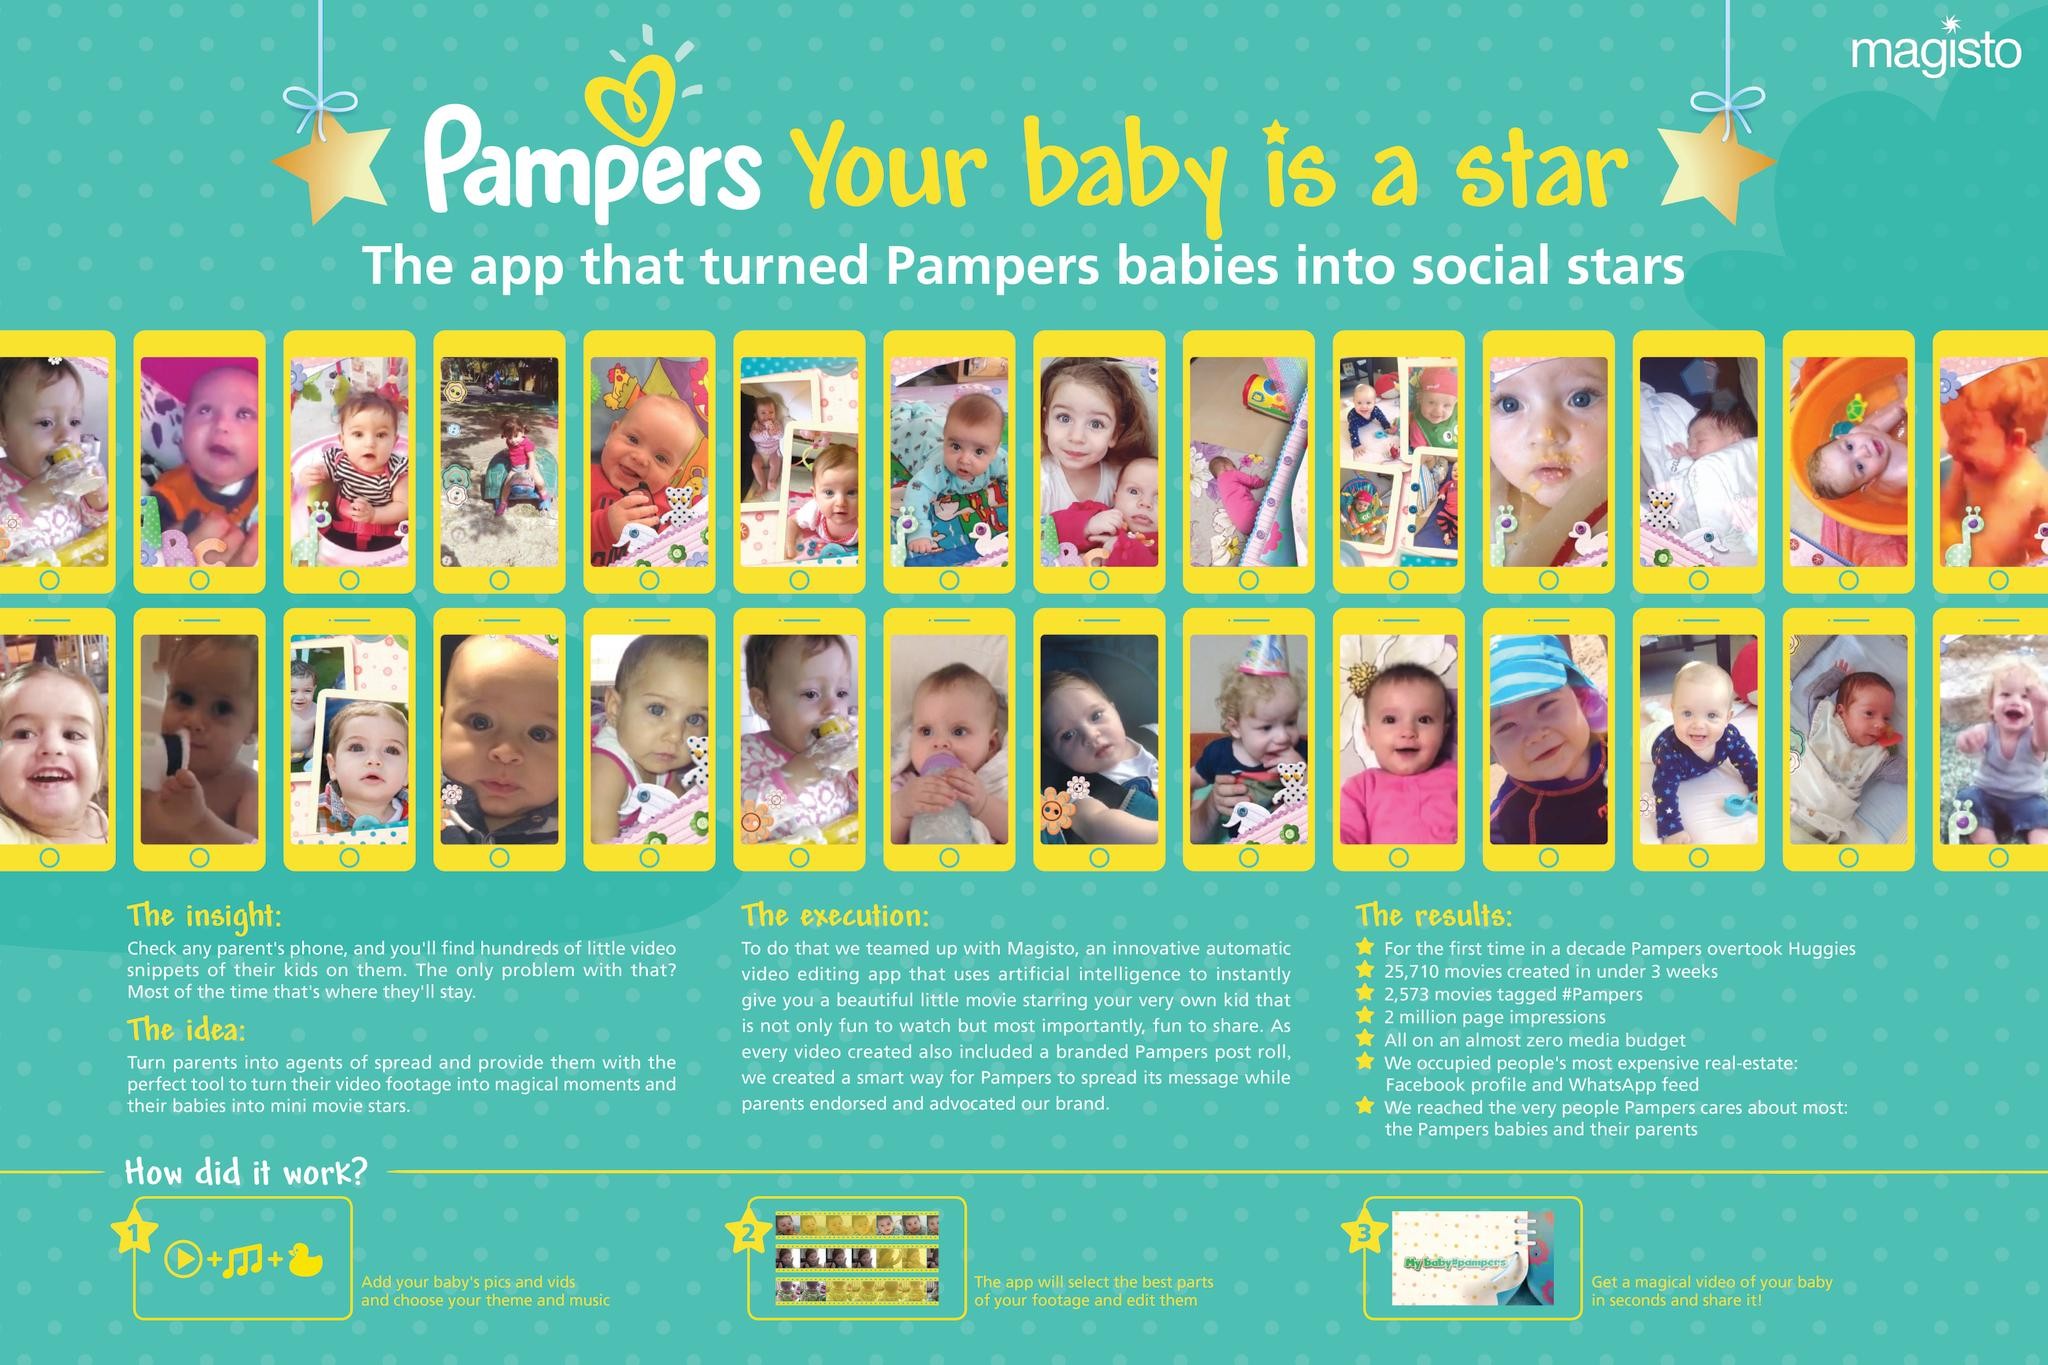 PAMPERS YOUR BABY IS A STAR